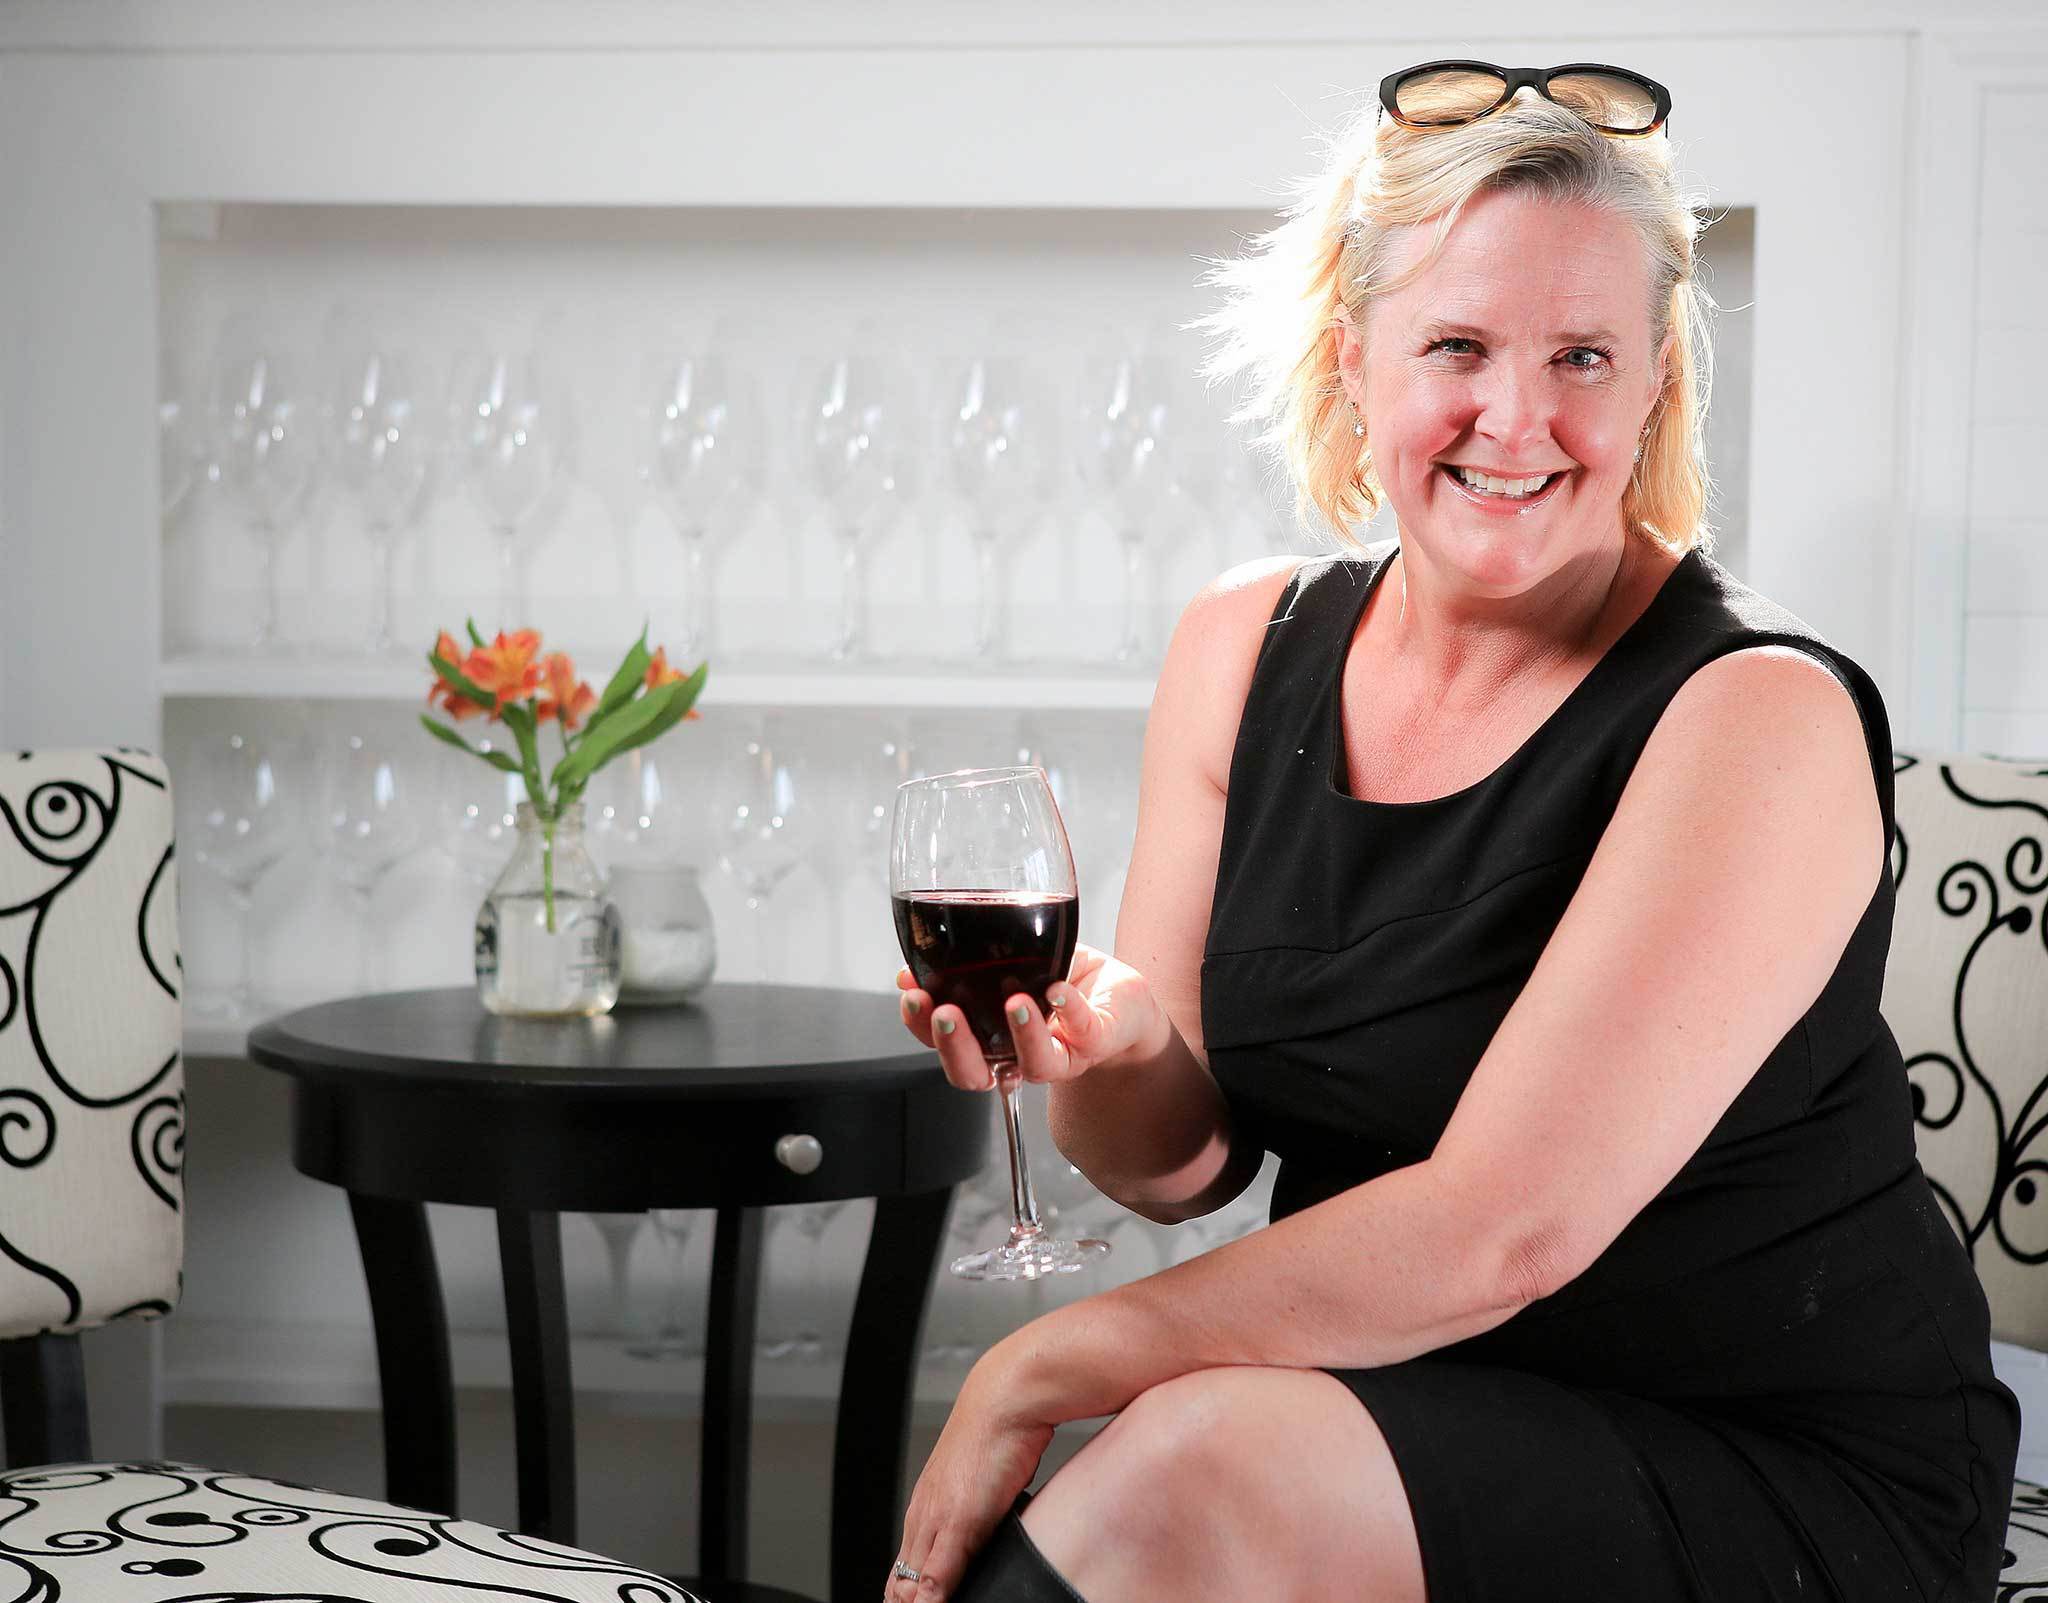 Judith Schneider-Wallace owns The Sydney Bakery & Wine Bar in Mukilteo where she is the chief baker and wine connoisseur. The old town bakery offers delicious pastries, soups, gourmet desserts, coffee and wine too. (Kevin Clark / The Herald)